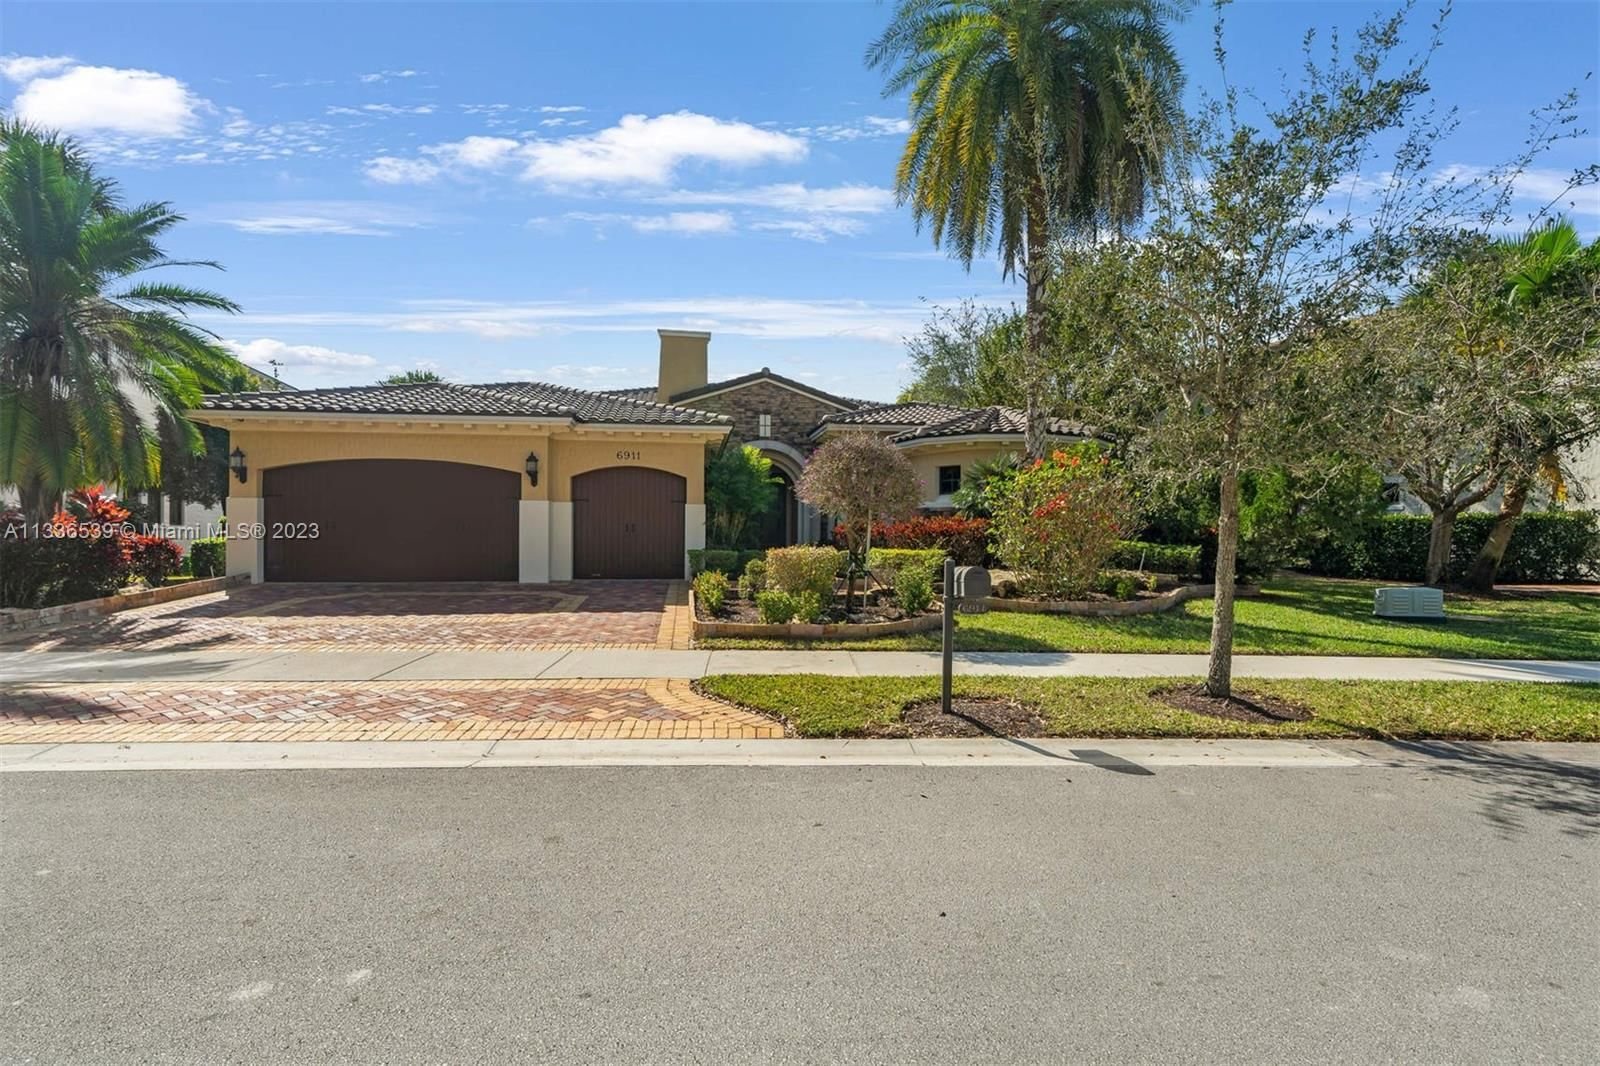 Real estate property located at 6911 Long Leaf Dr, Broward County, PARKLAND GOLF & COUNTRY C, Parkland, FL